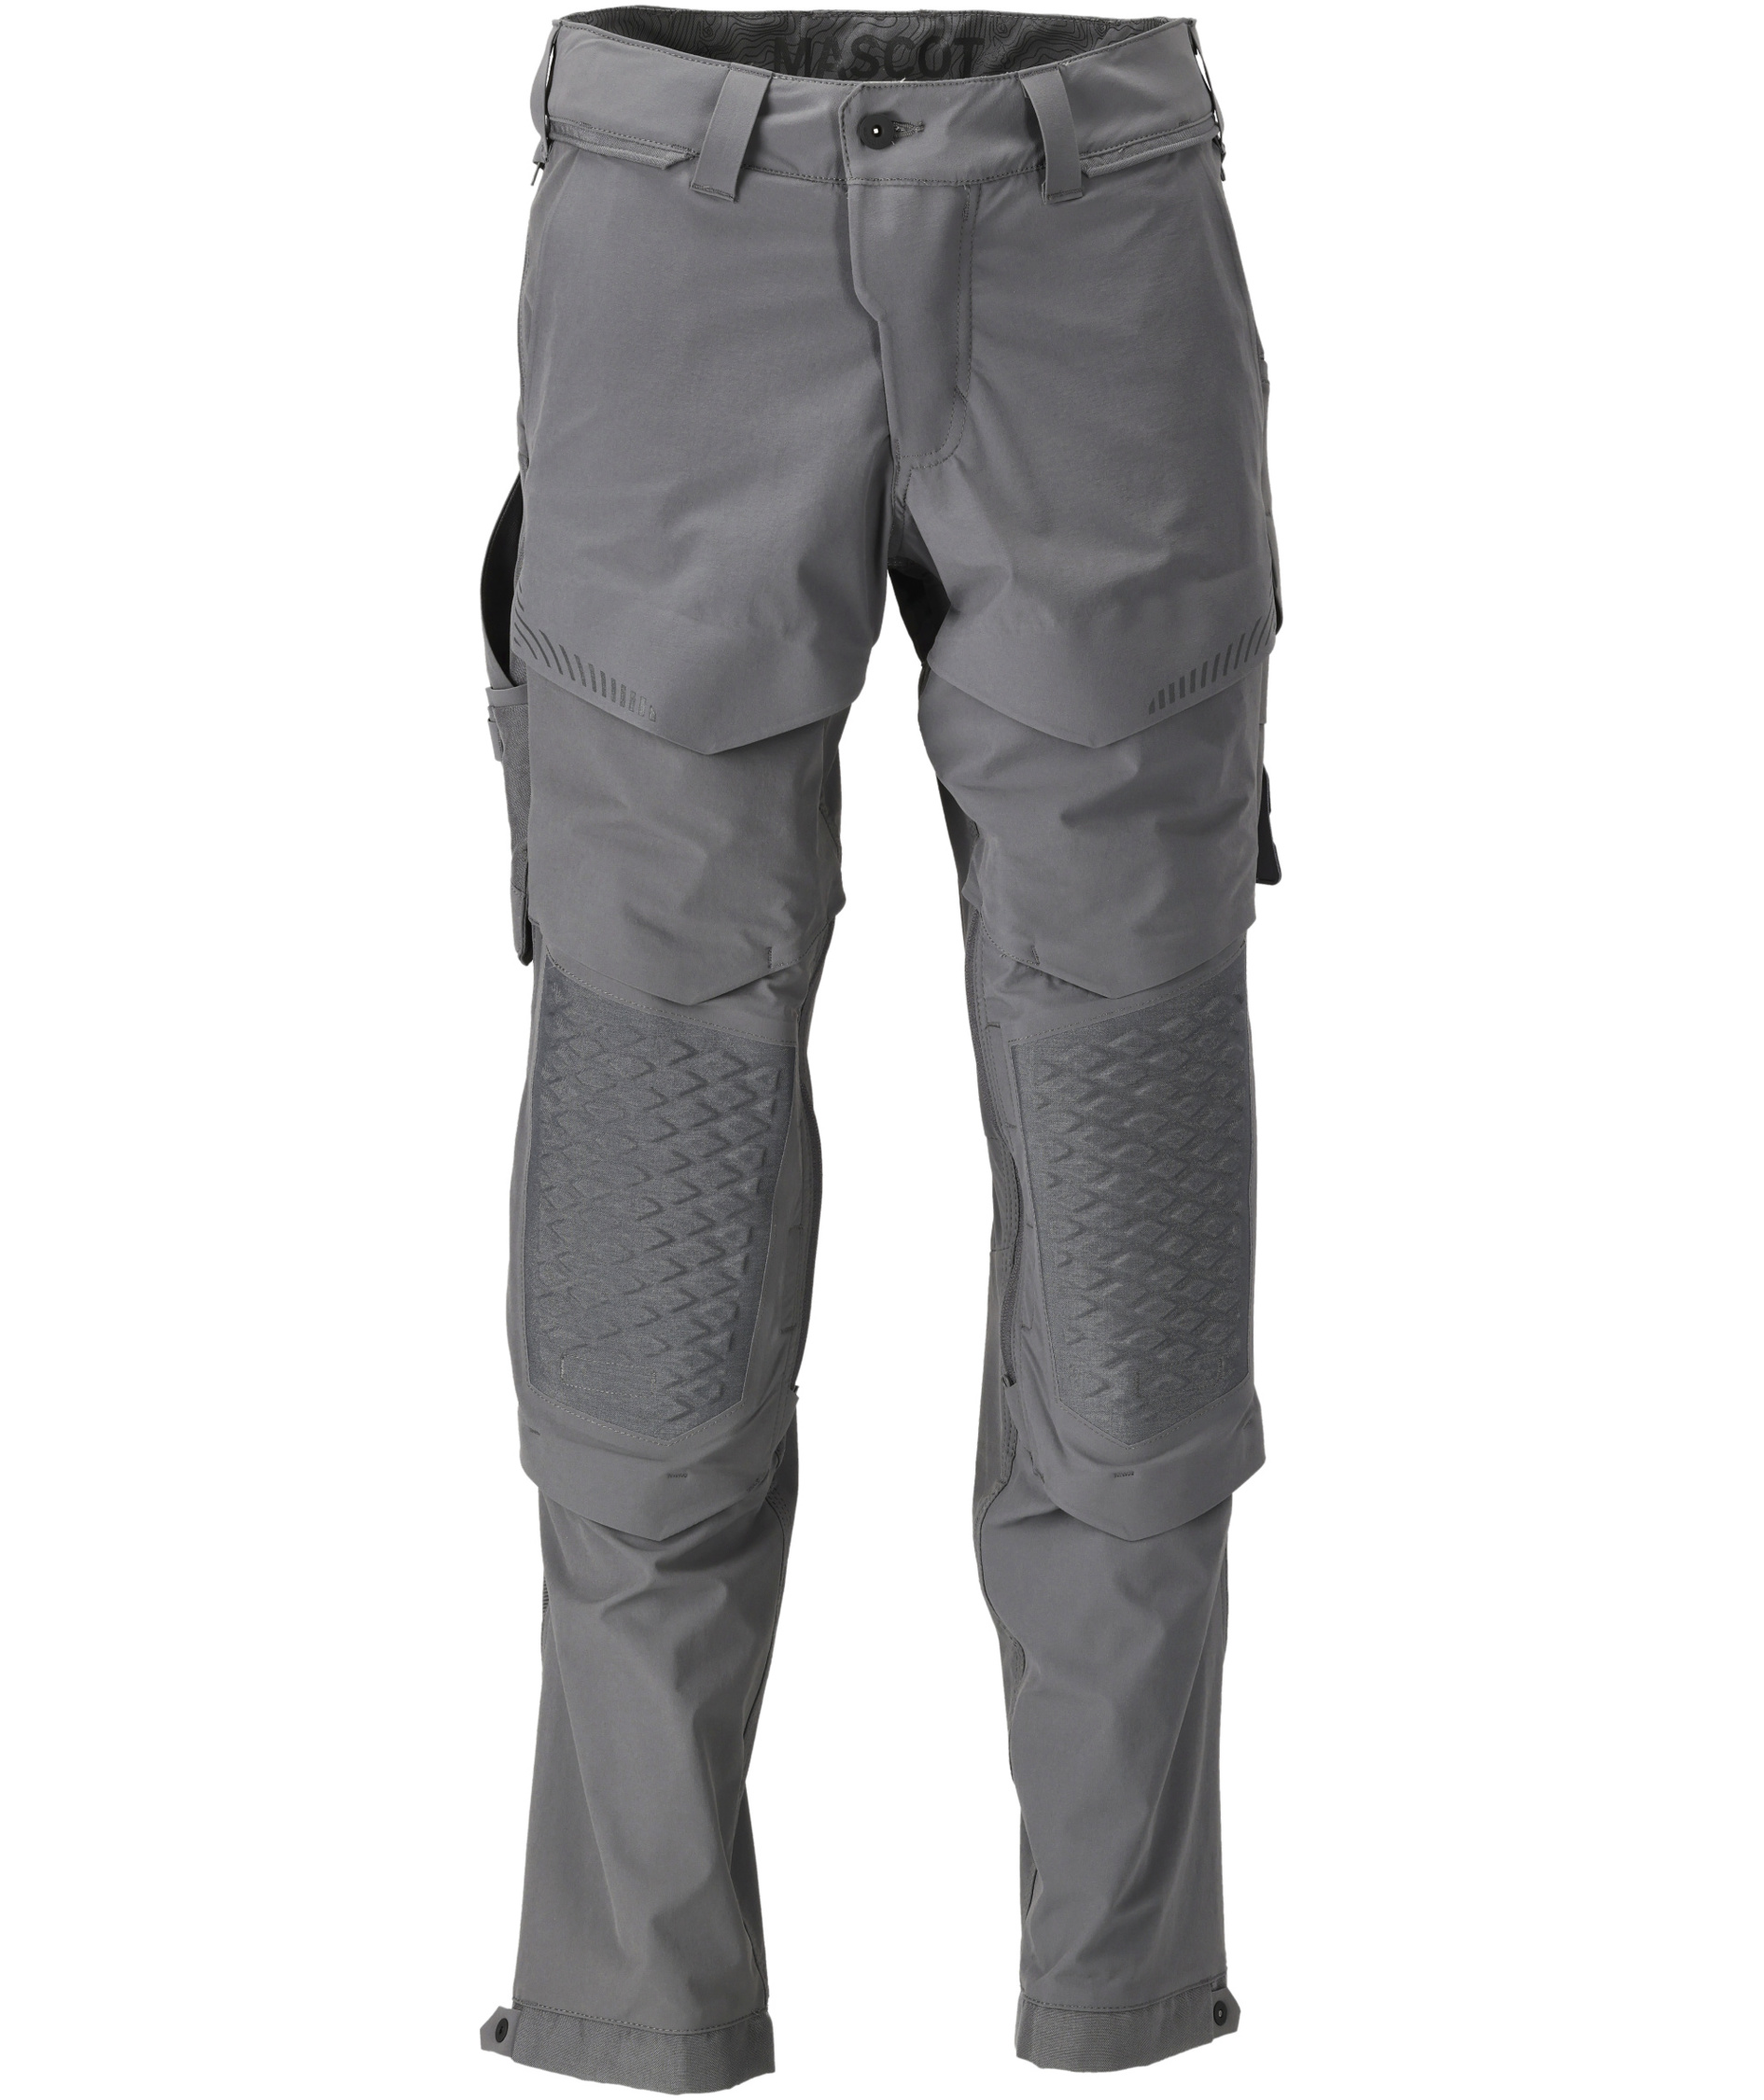 MASCOT Springfield Craftman's Trousers - MJ Scannell Safety